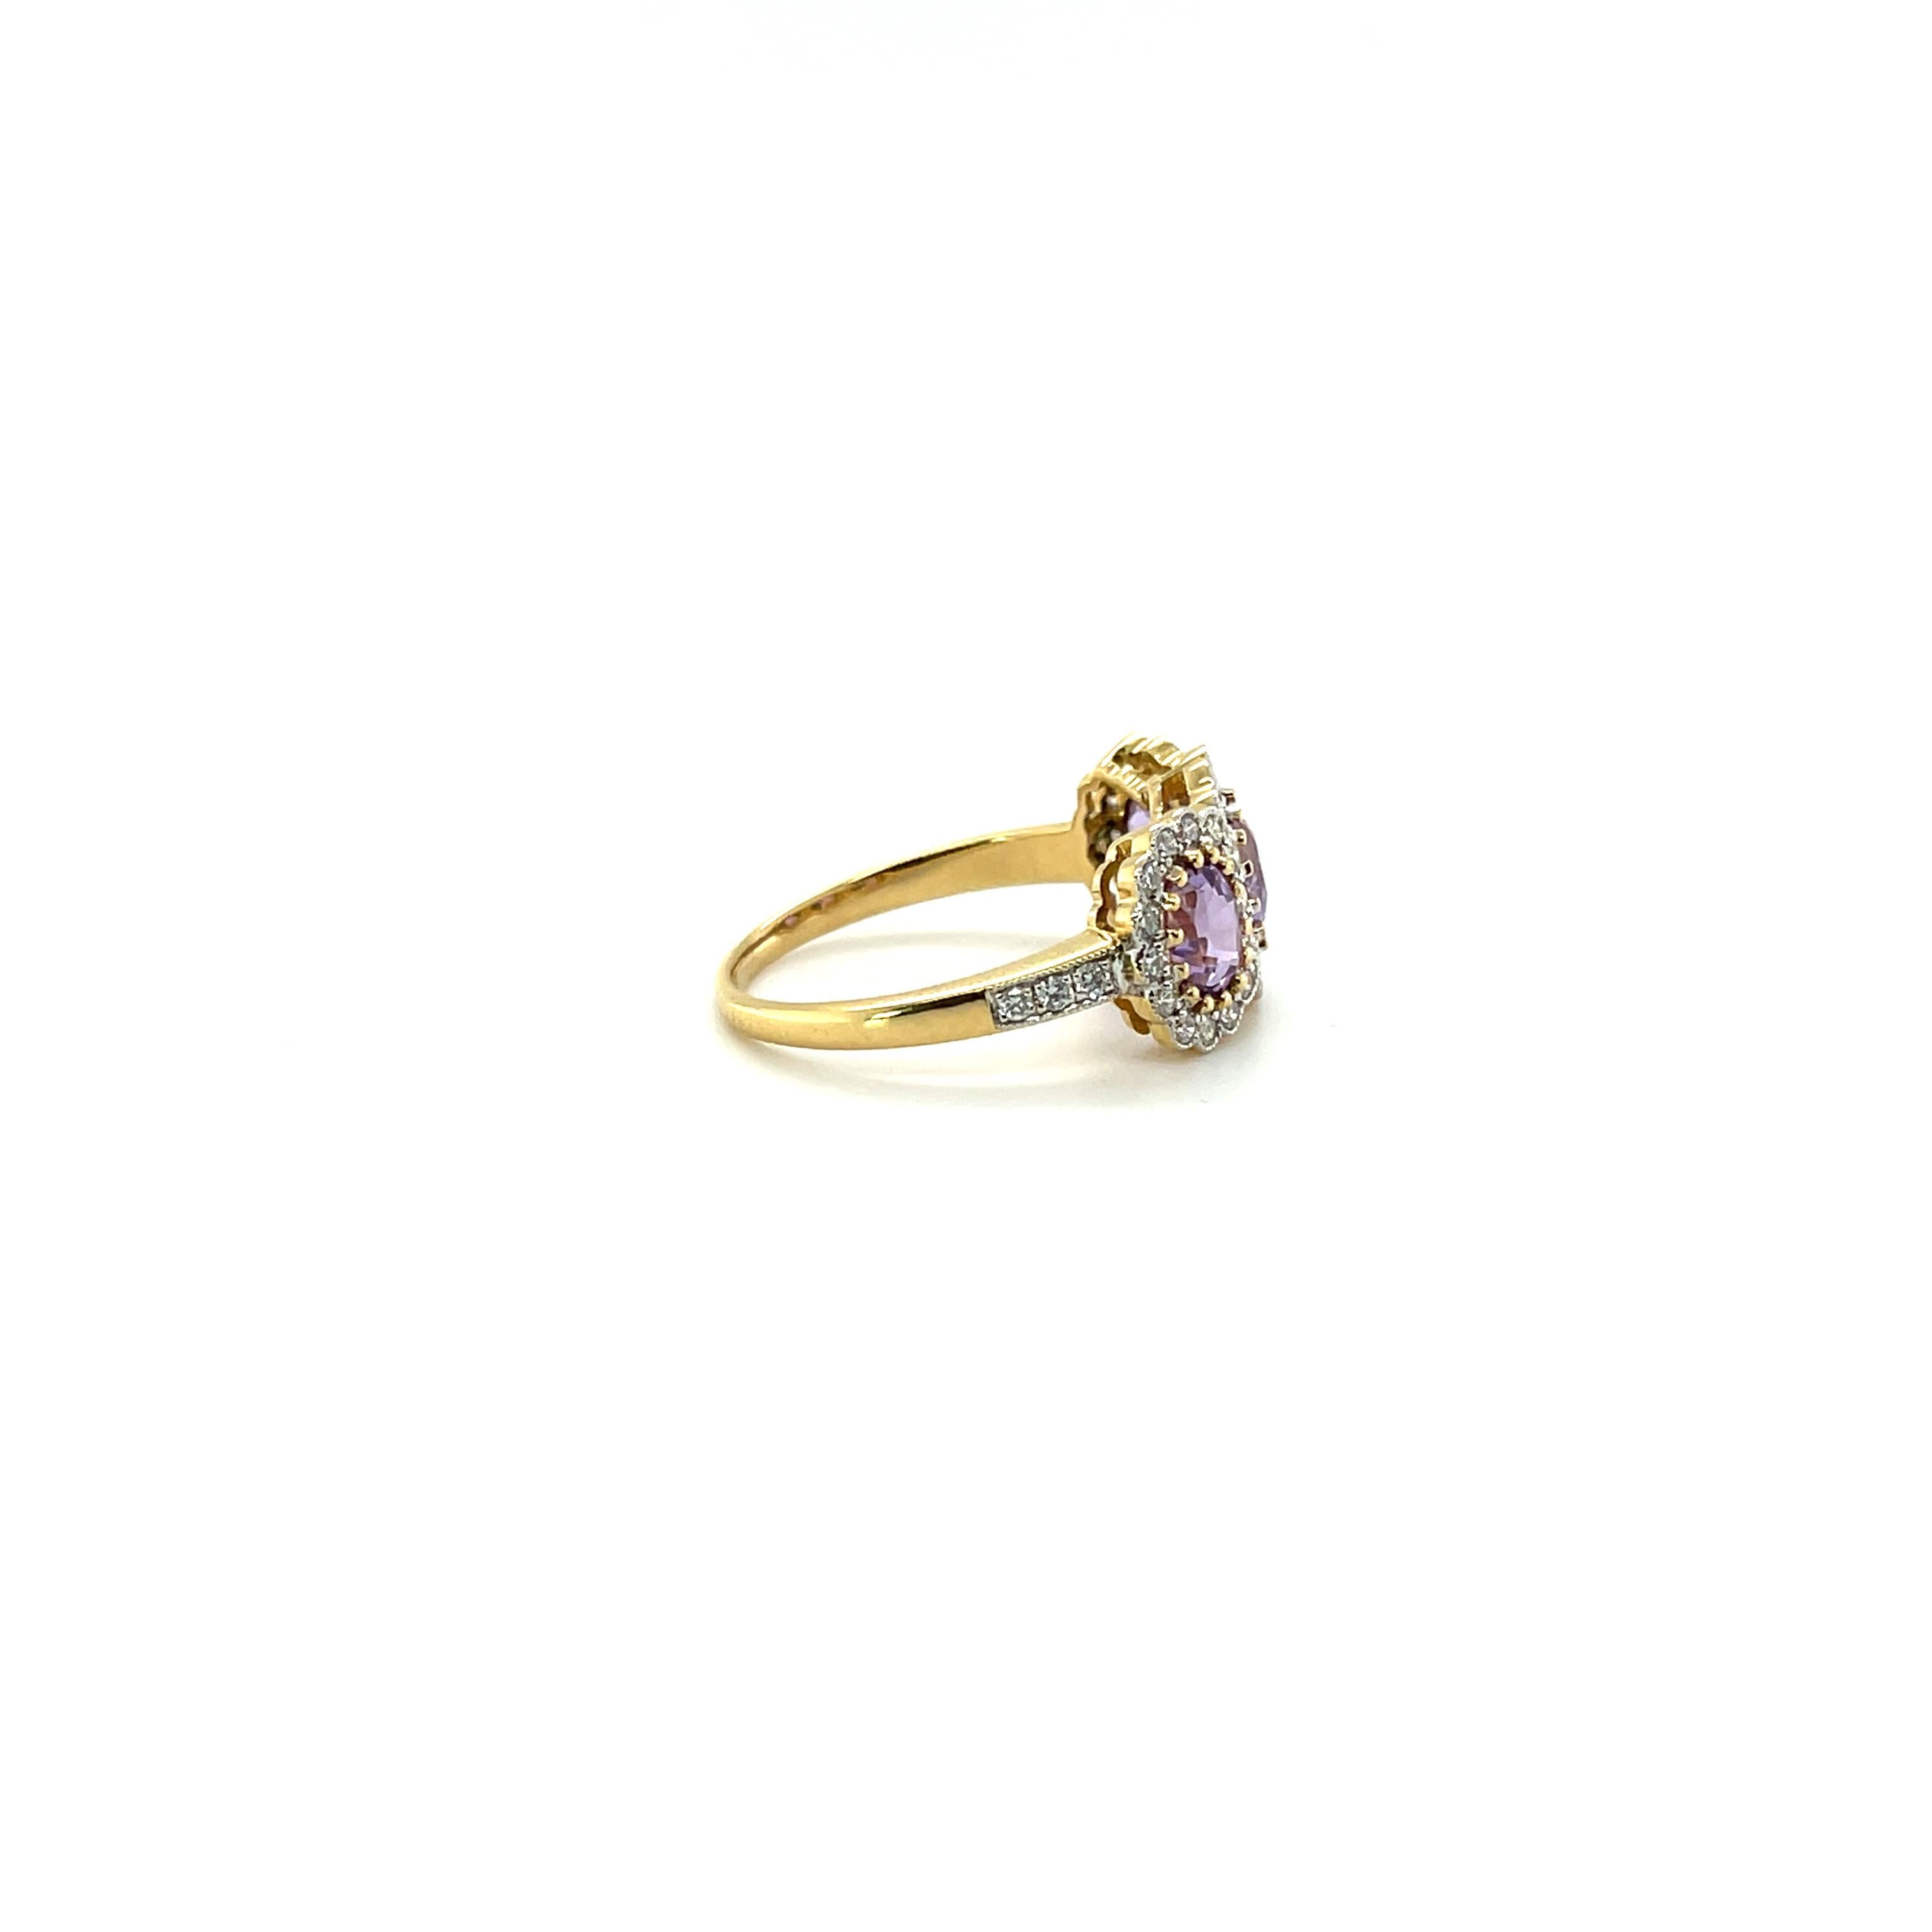 Gorgeous trilogy Sapphires and Diamonds , gorgeously crafted in eighteen karat yellow gold, complimented by a stunning polished finish design.

Purpose of appraisal: Retail replacement value for insurance purposes


Item: One stamped 18CT yellow